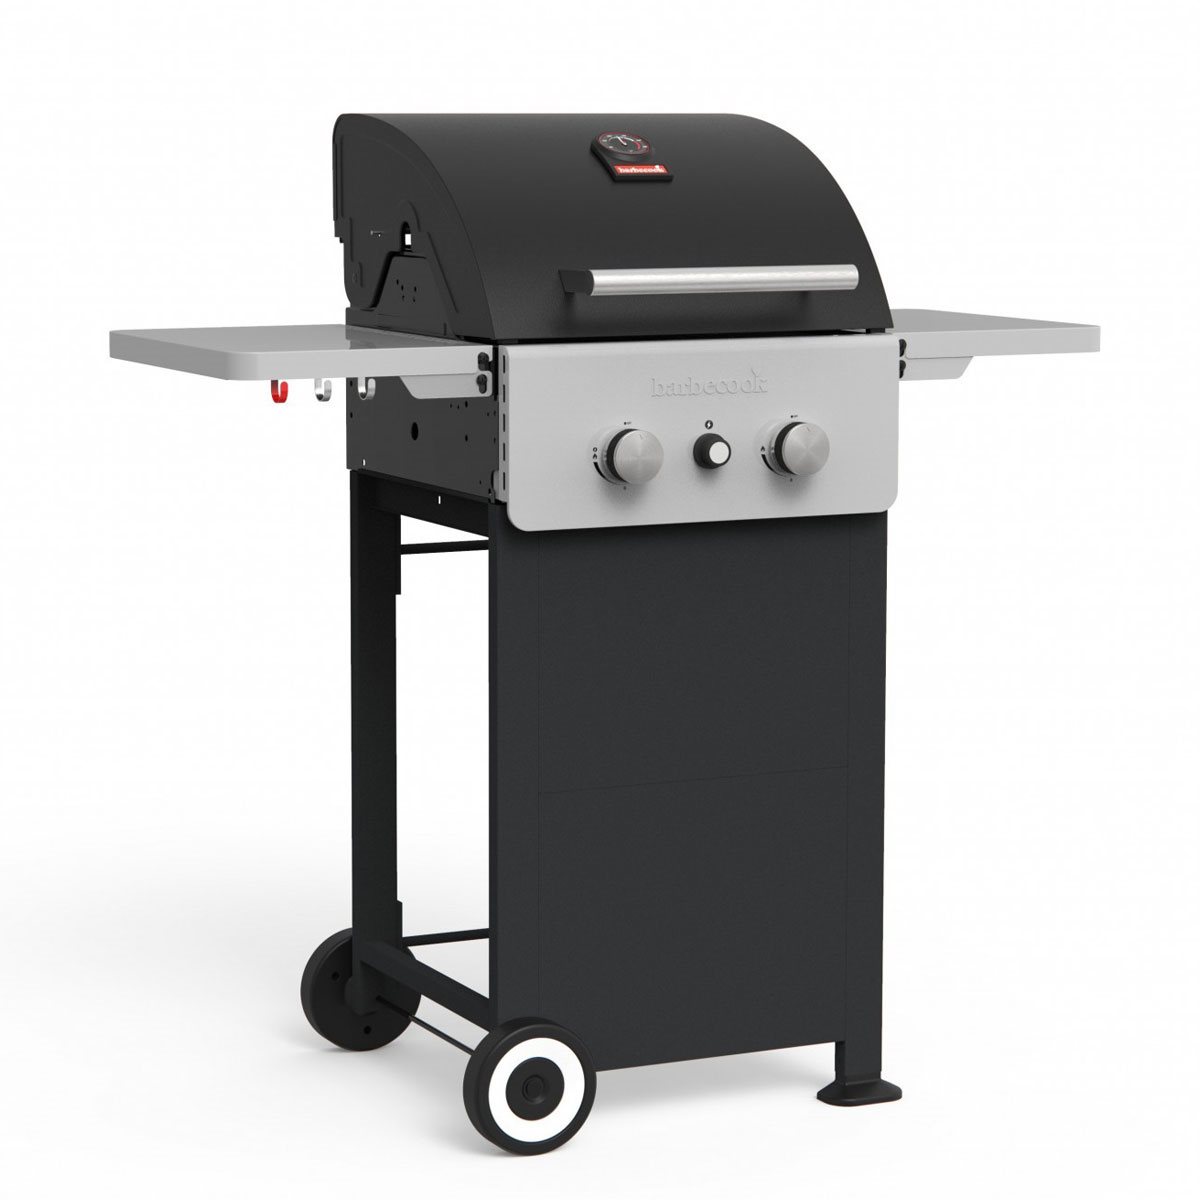 Barbecook Ψησταριά Γκαζιού Spring 2002 - 7,6 kW